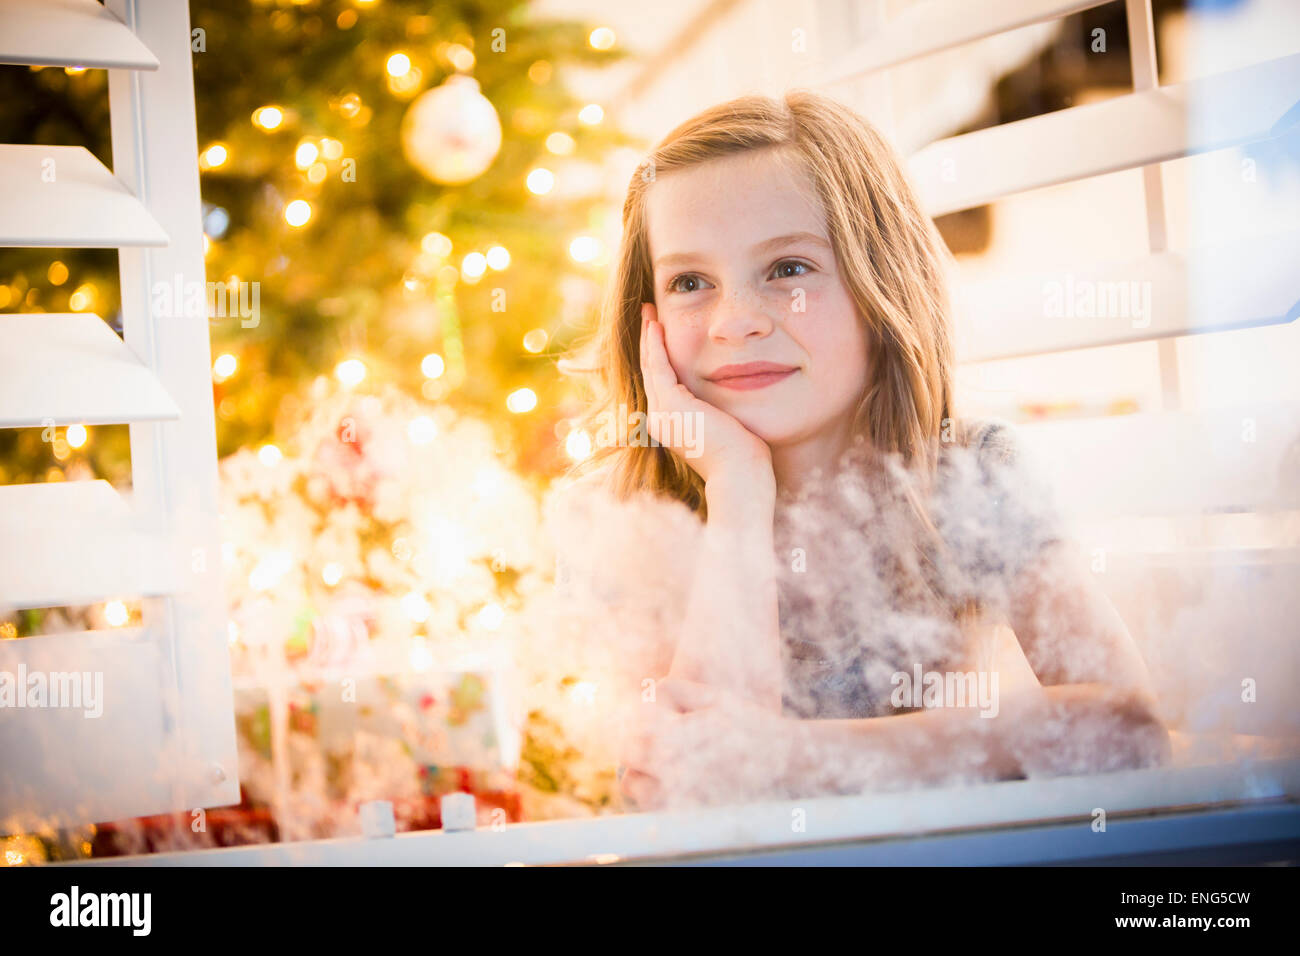 Caucasian girl peering out window at Christmas Stock Photo